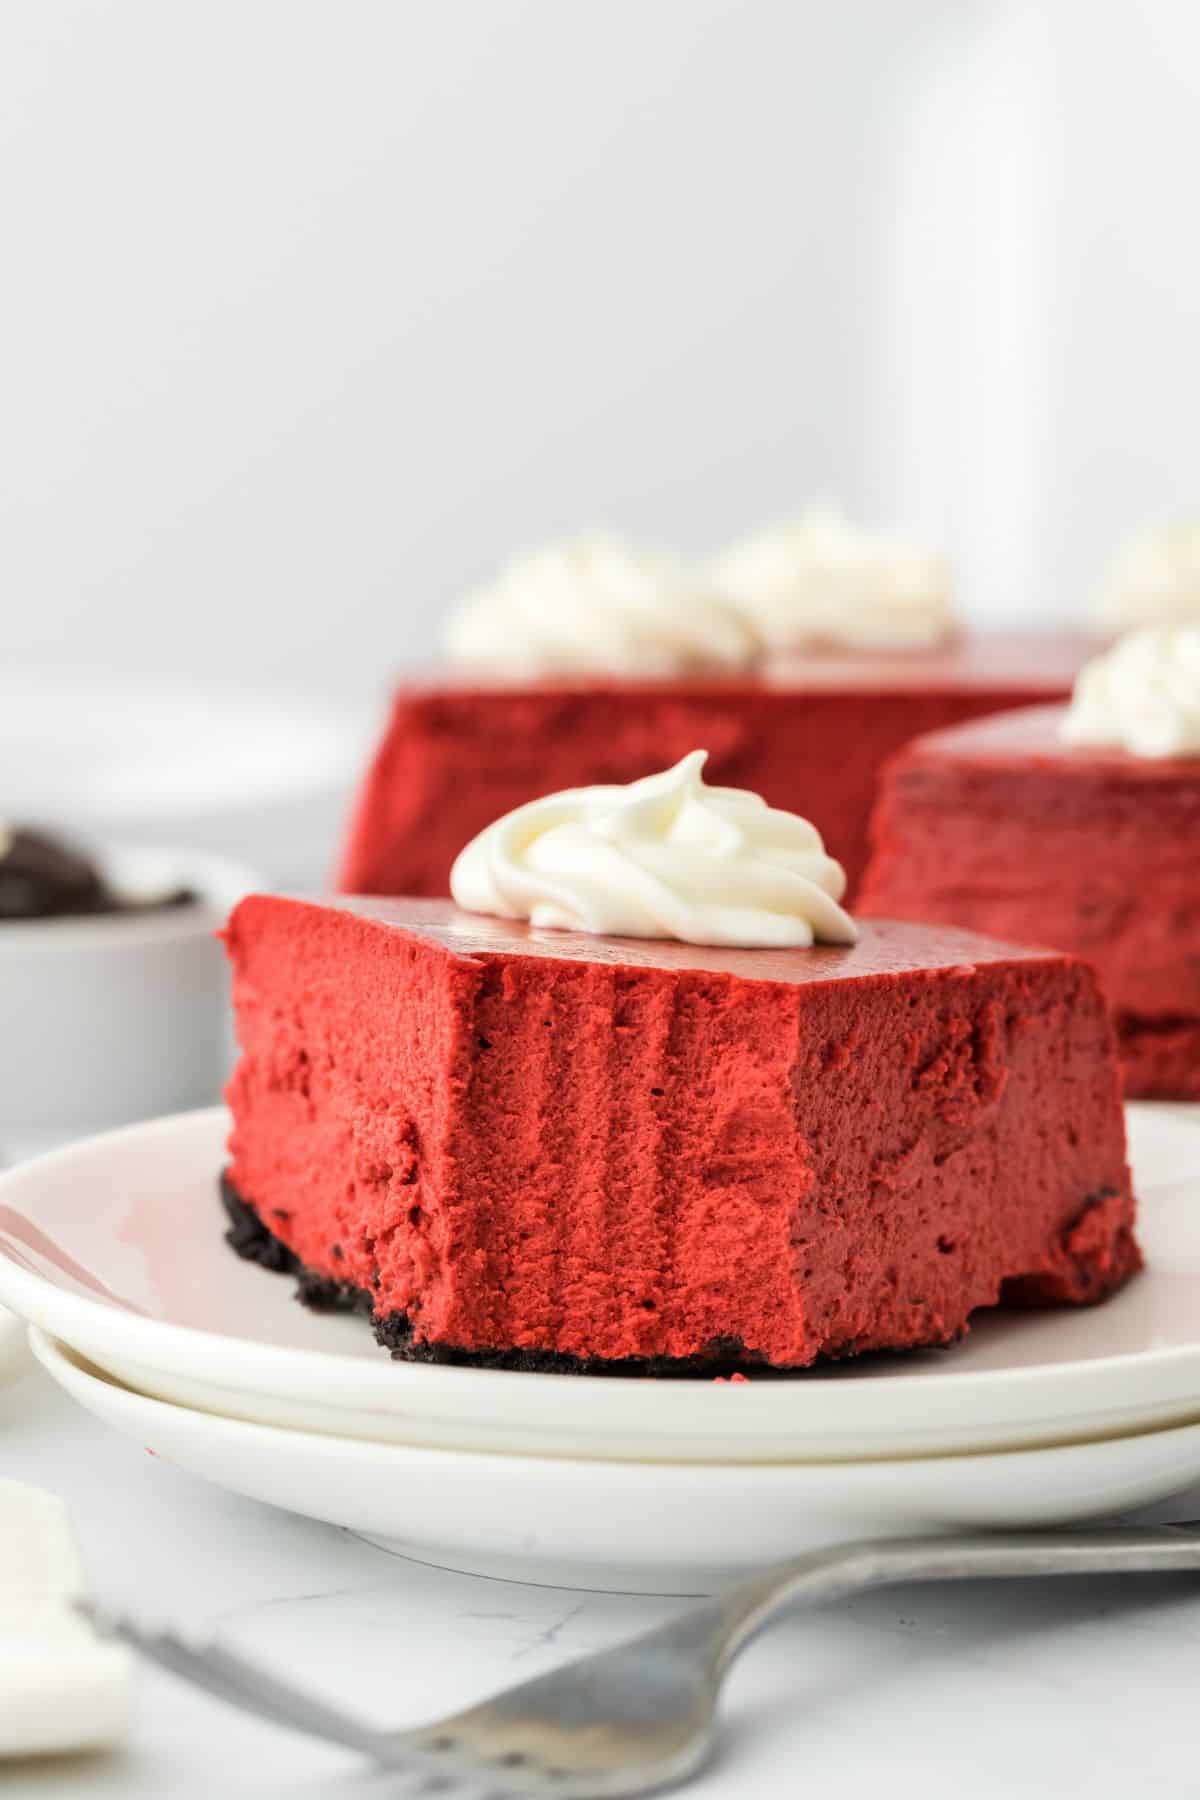 A slice of red velvet cheesecake on a stack of two plates topped with whipped cream and a bite missing.